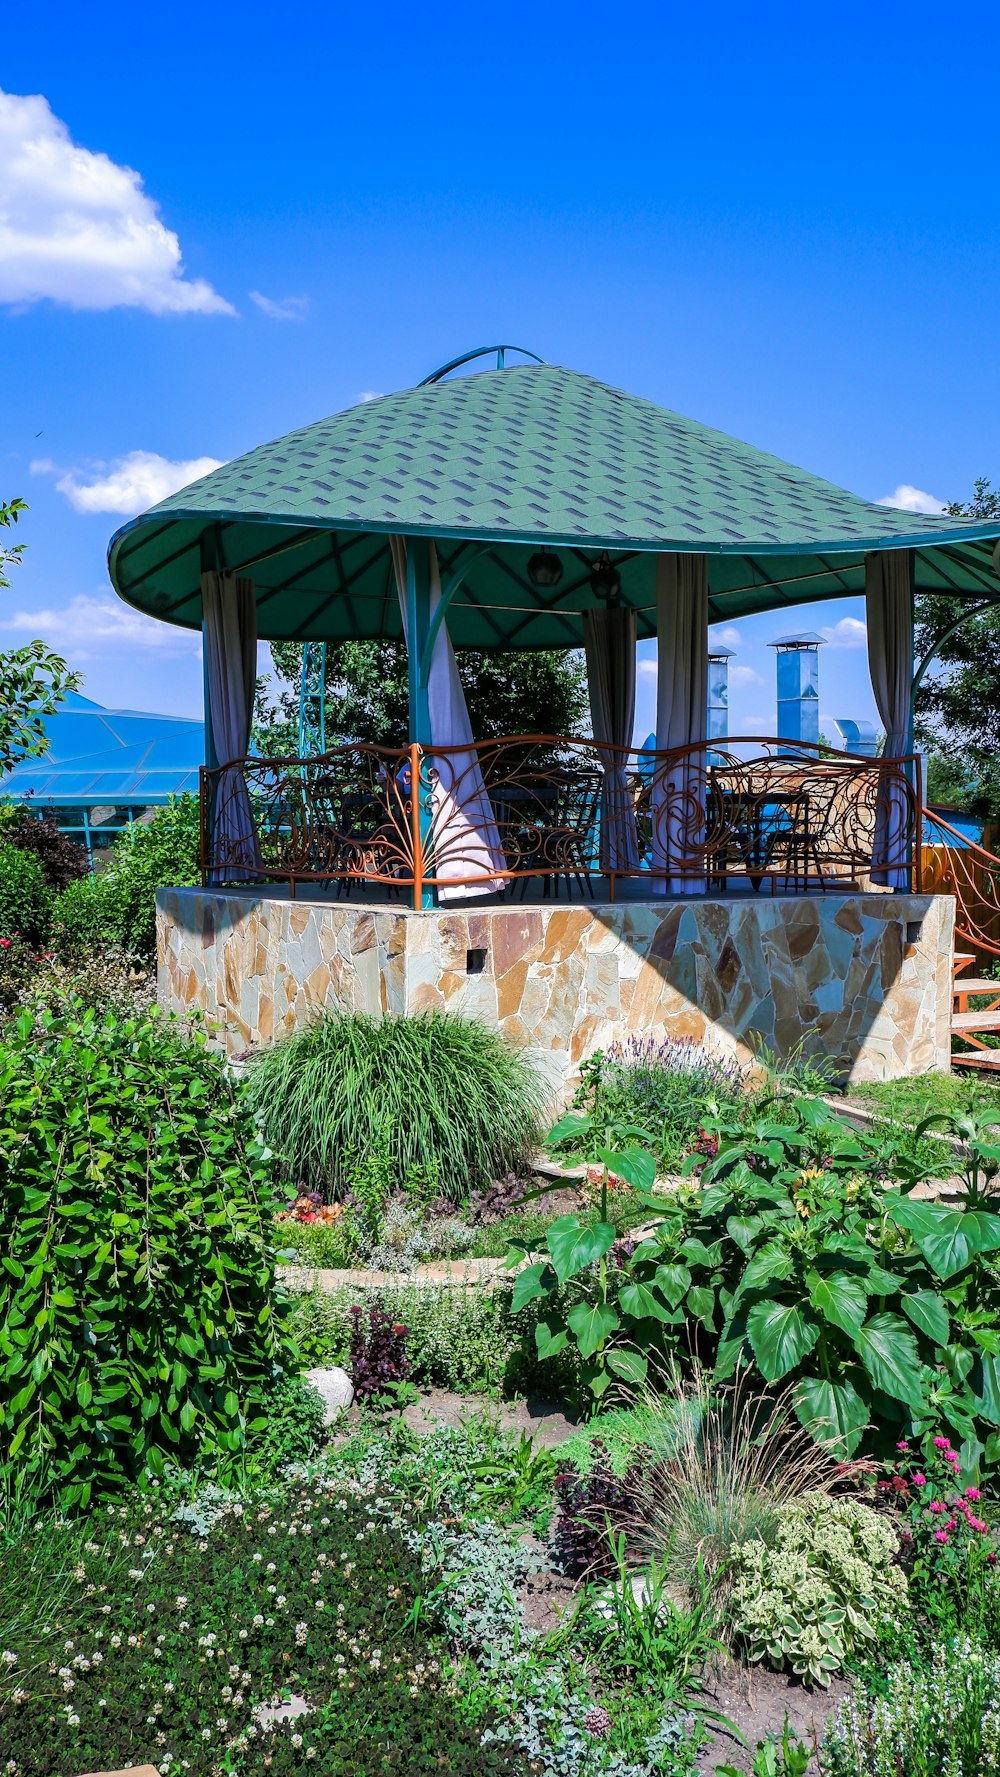 a gazebo with a green roof